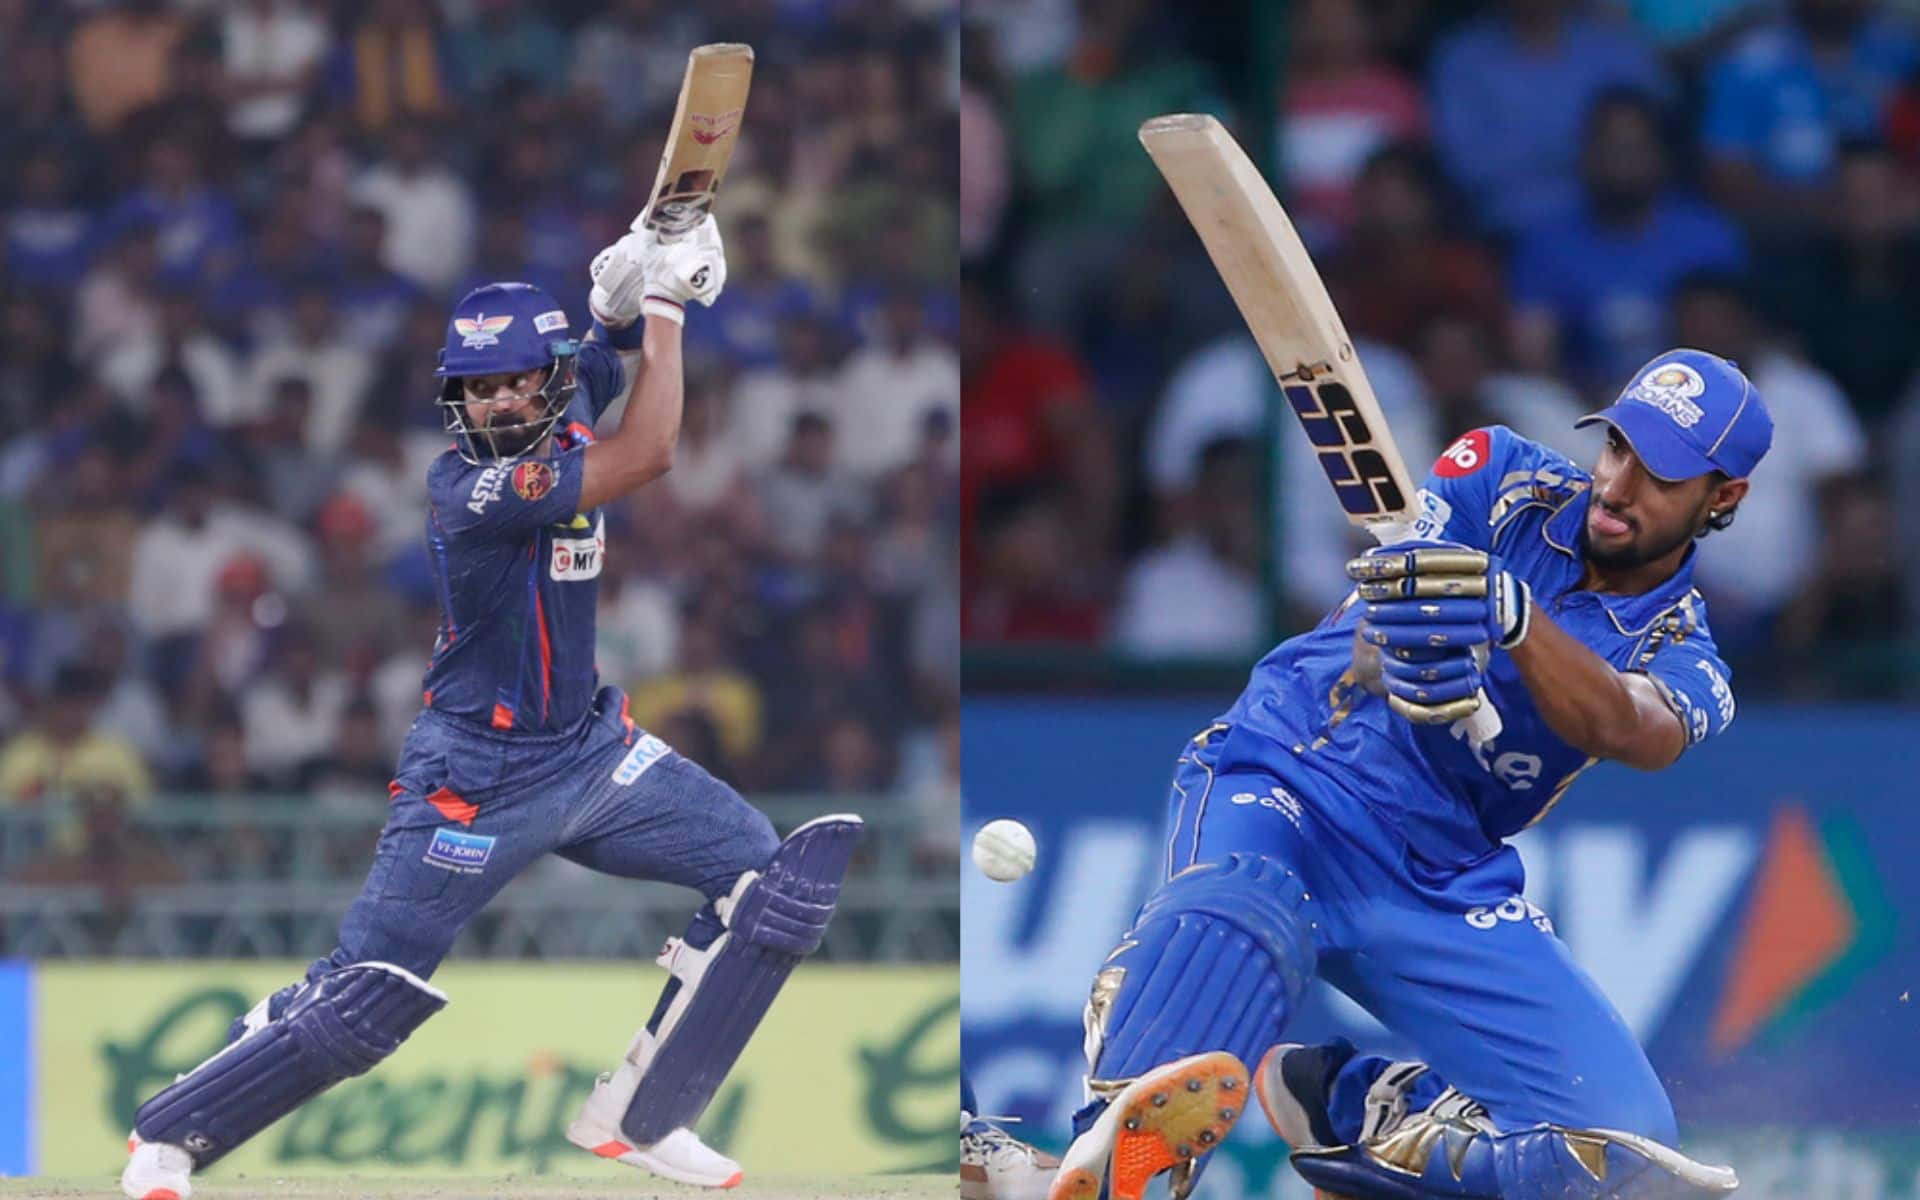 KL Rahul and Tilak Varma will be crucial for their teams in the match [AP Photos]